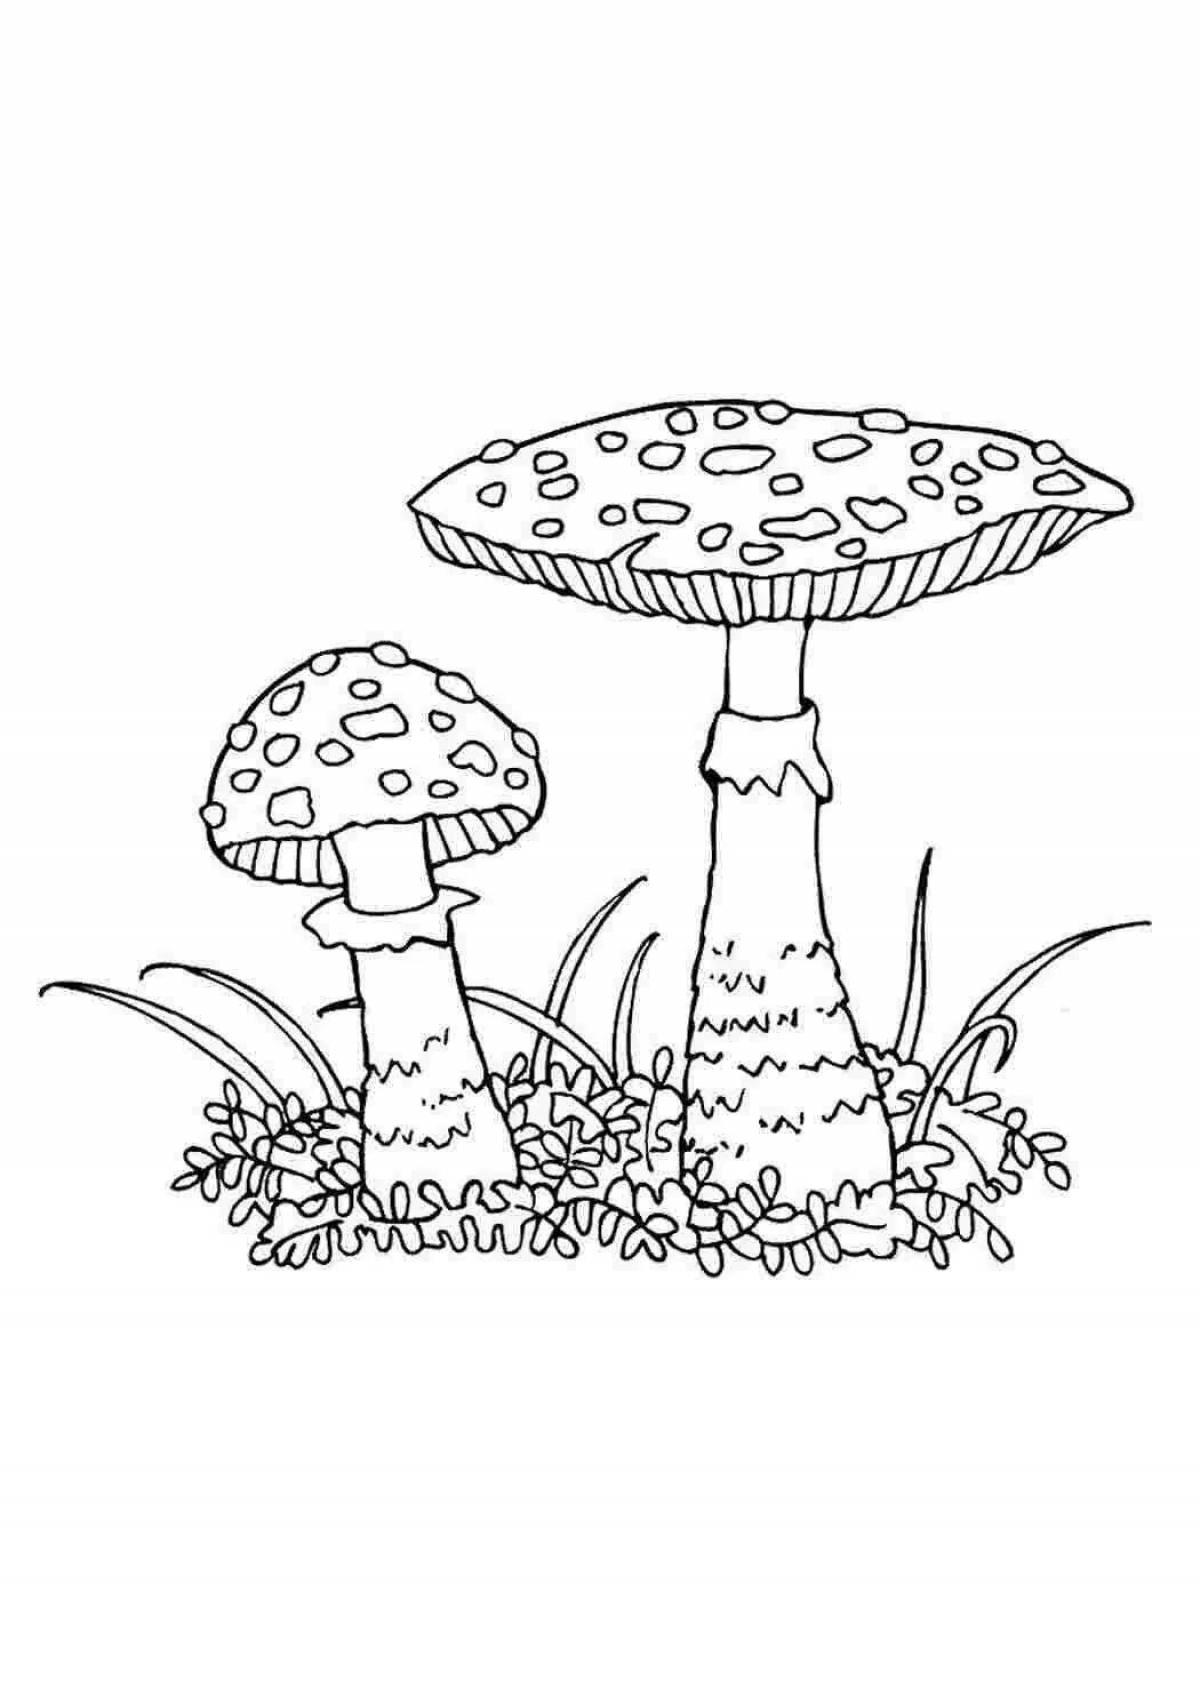 Violent drawing of a fly agaric mushroom